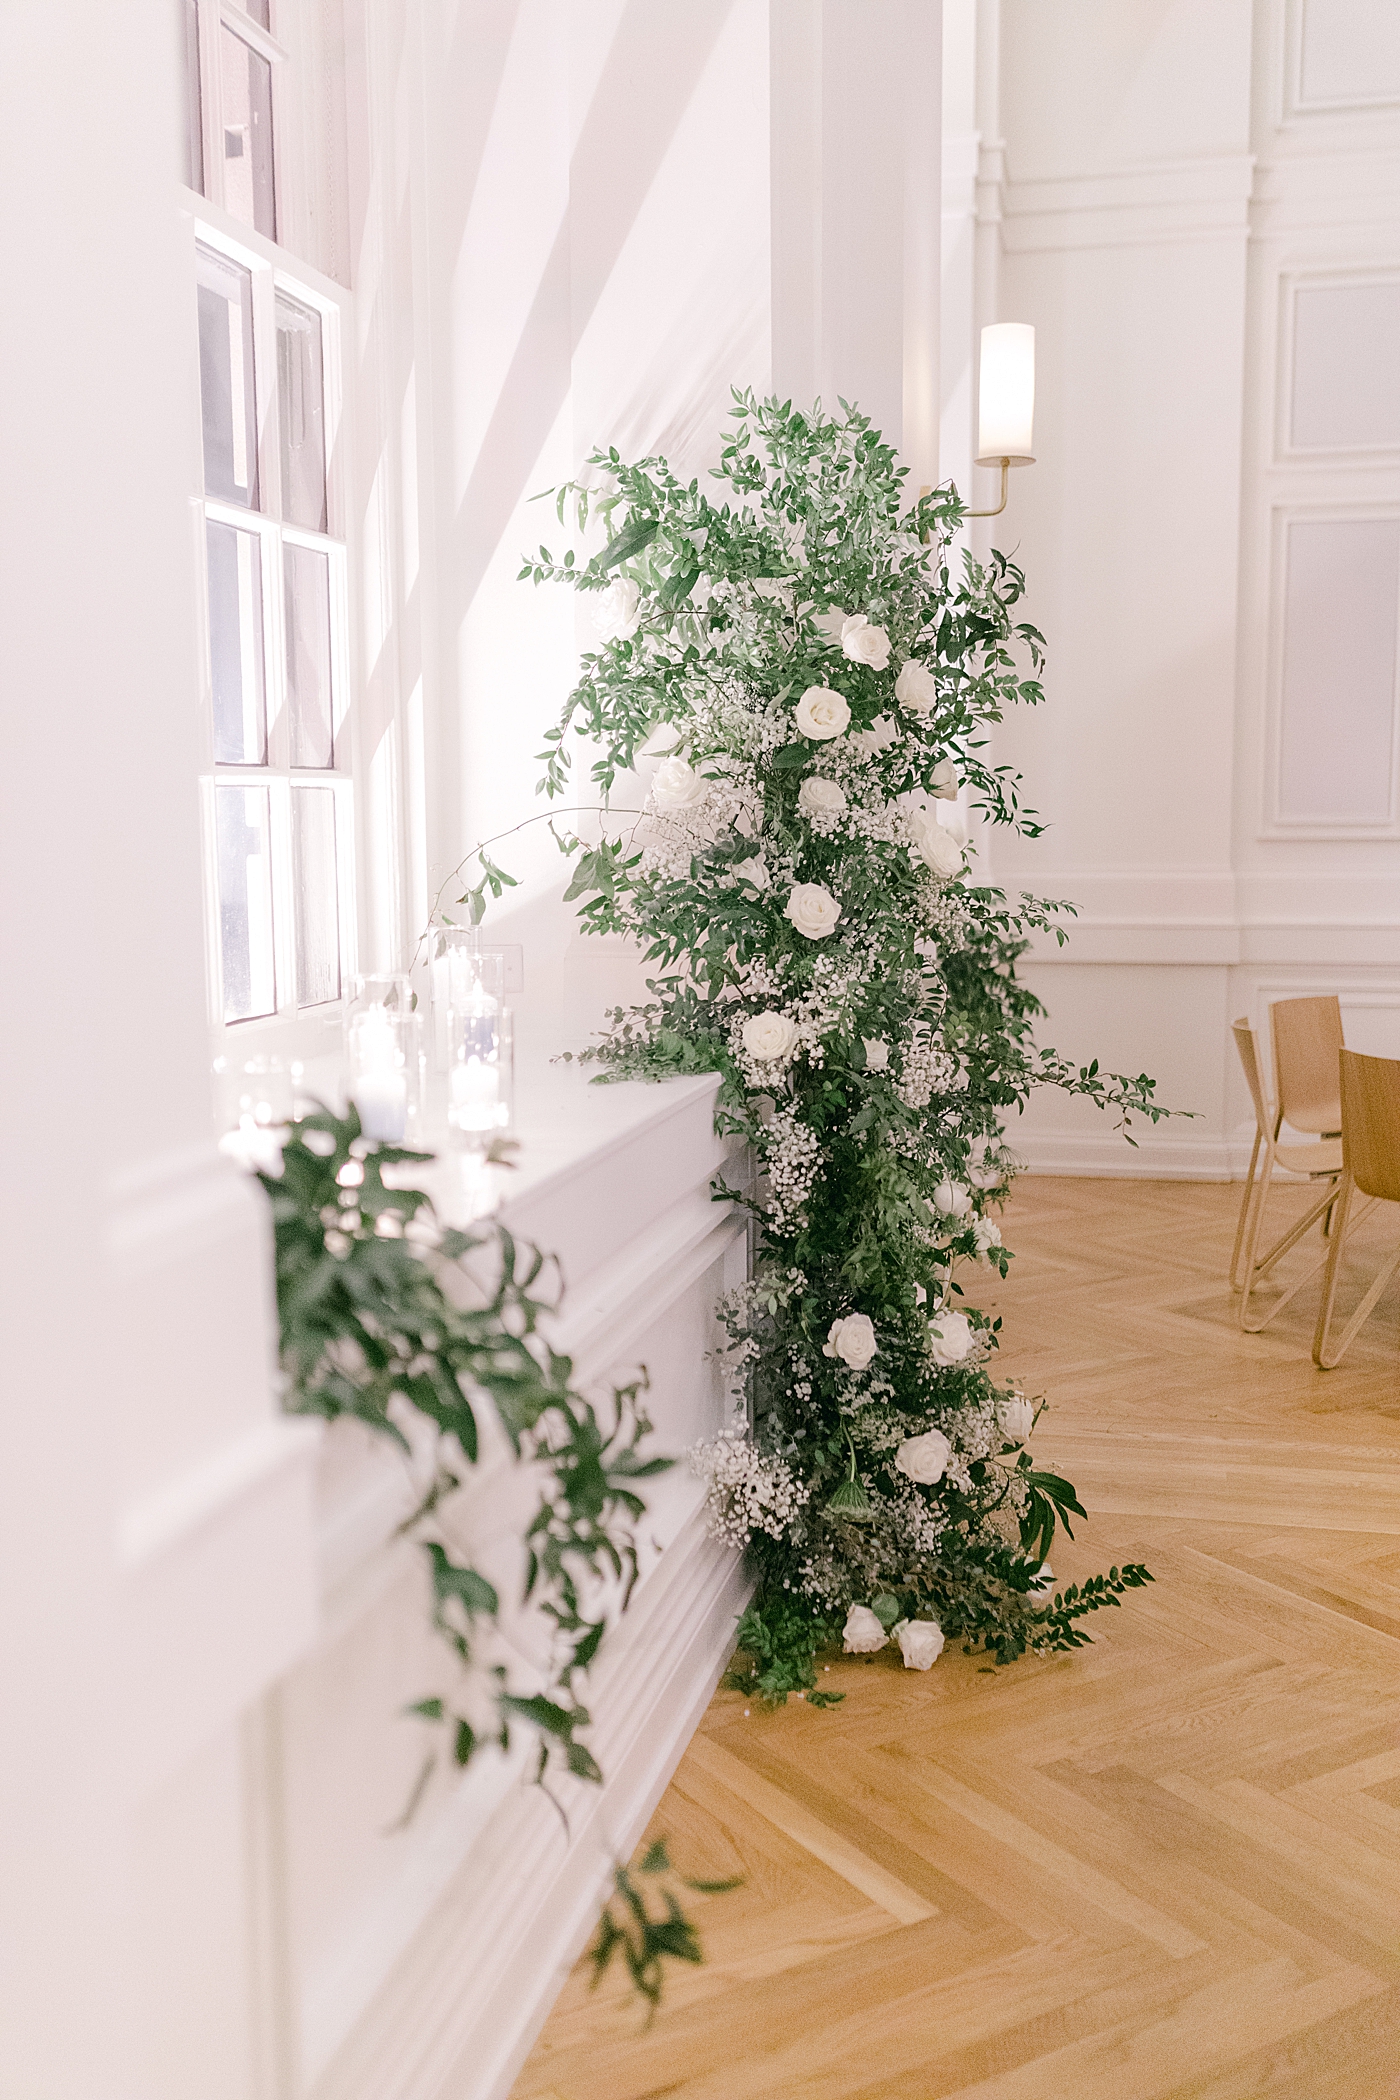 Floral installation during Noelle, Nashville Wedding | Photo by Hope Helmuth Photography